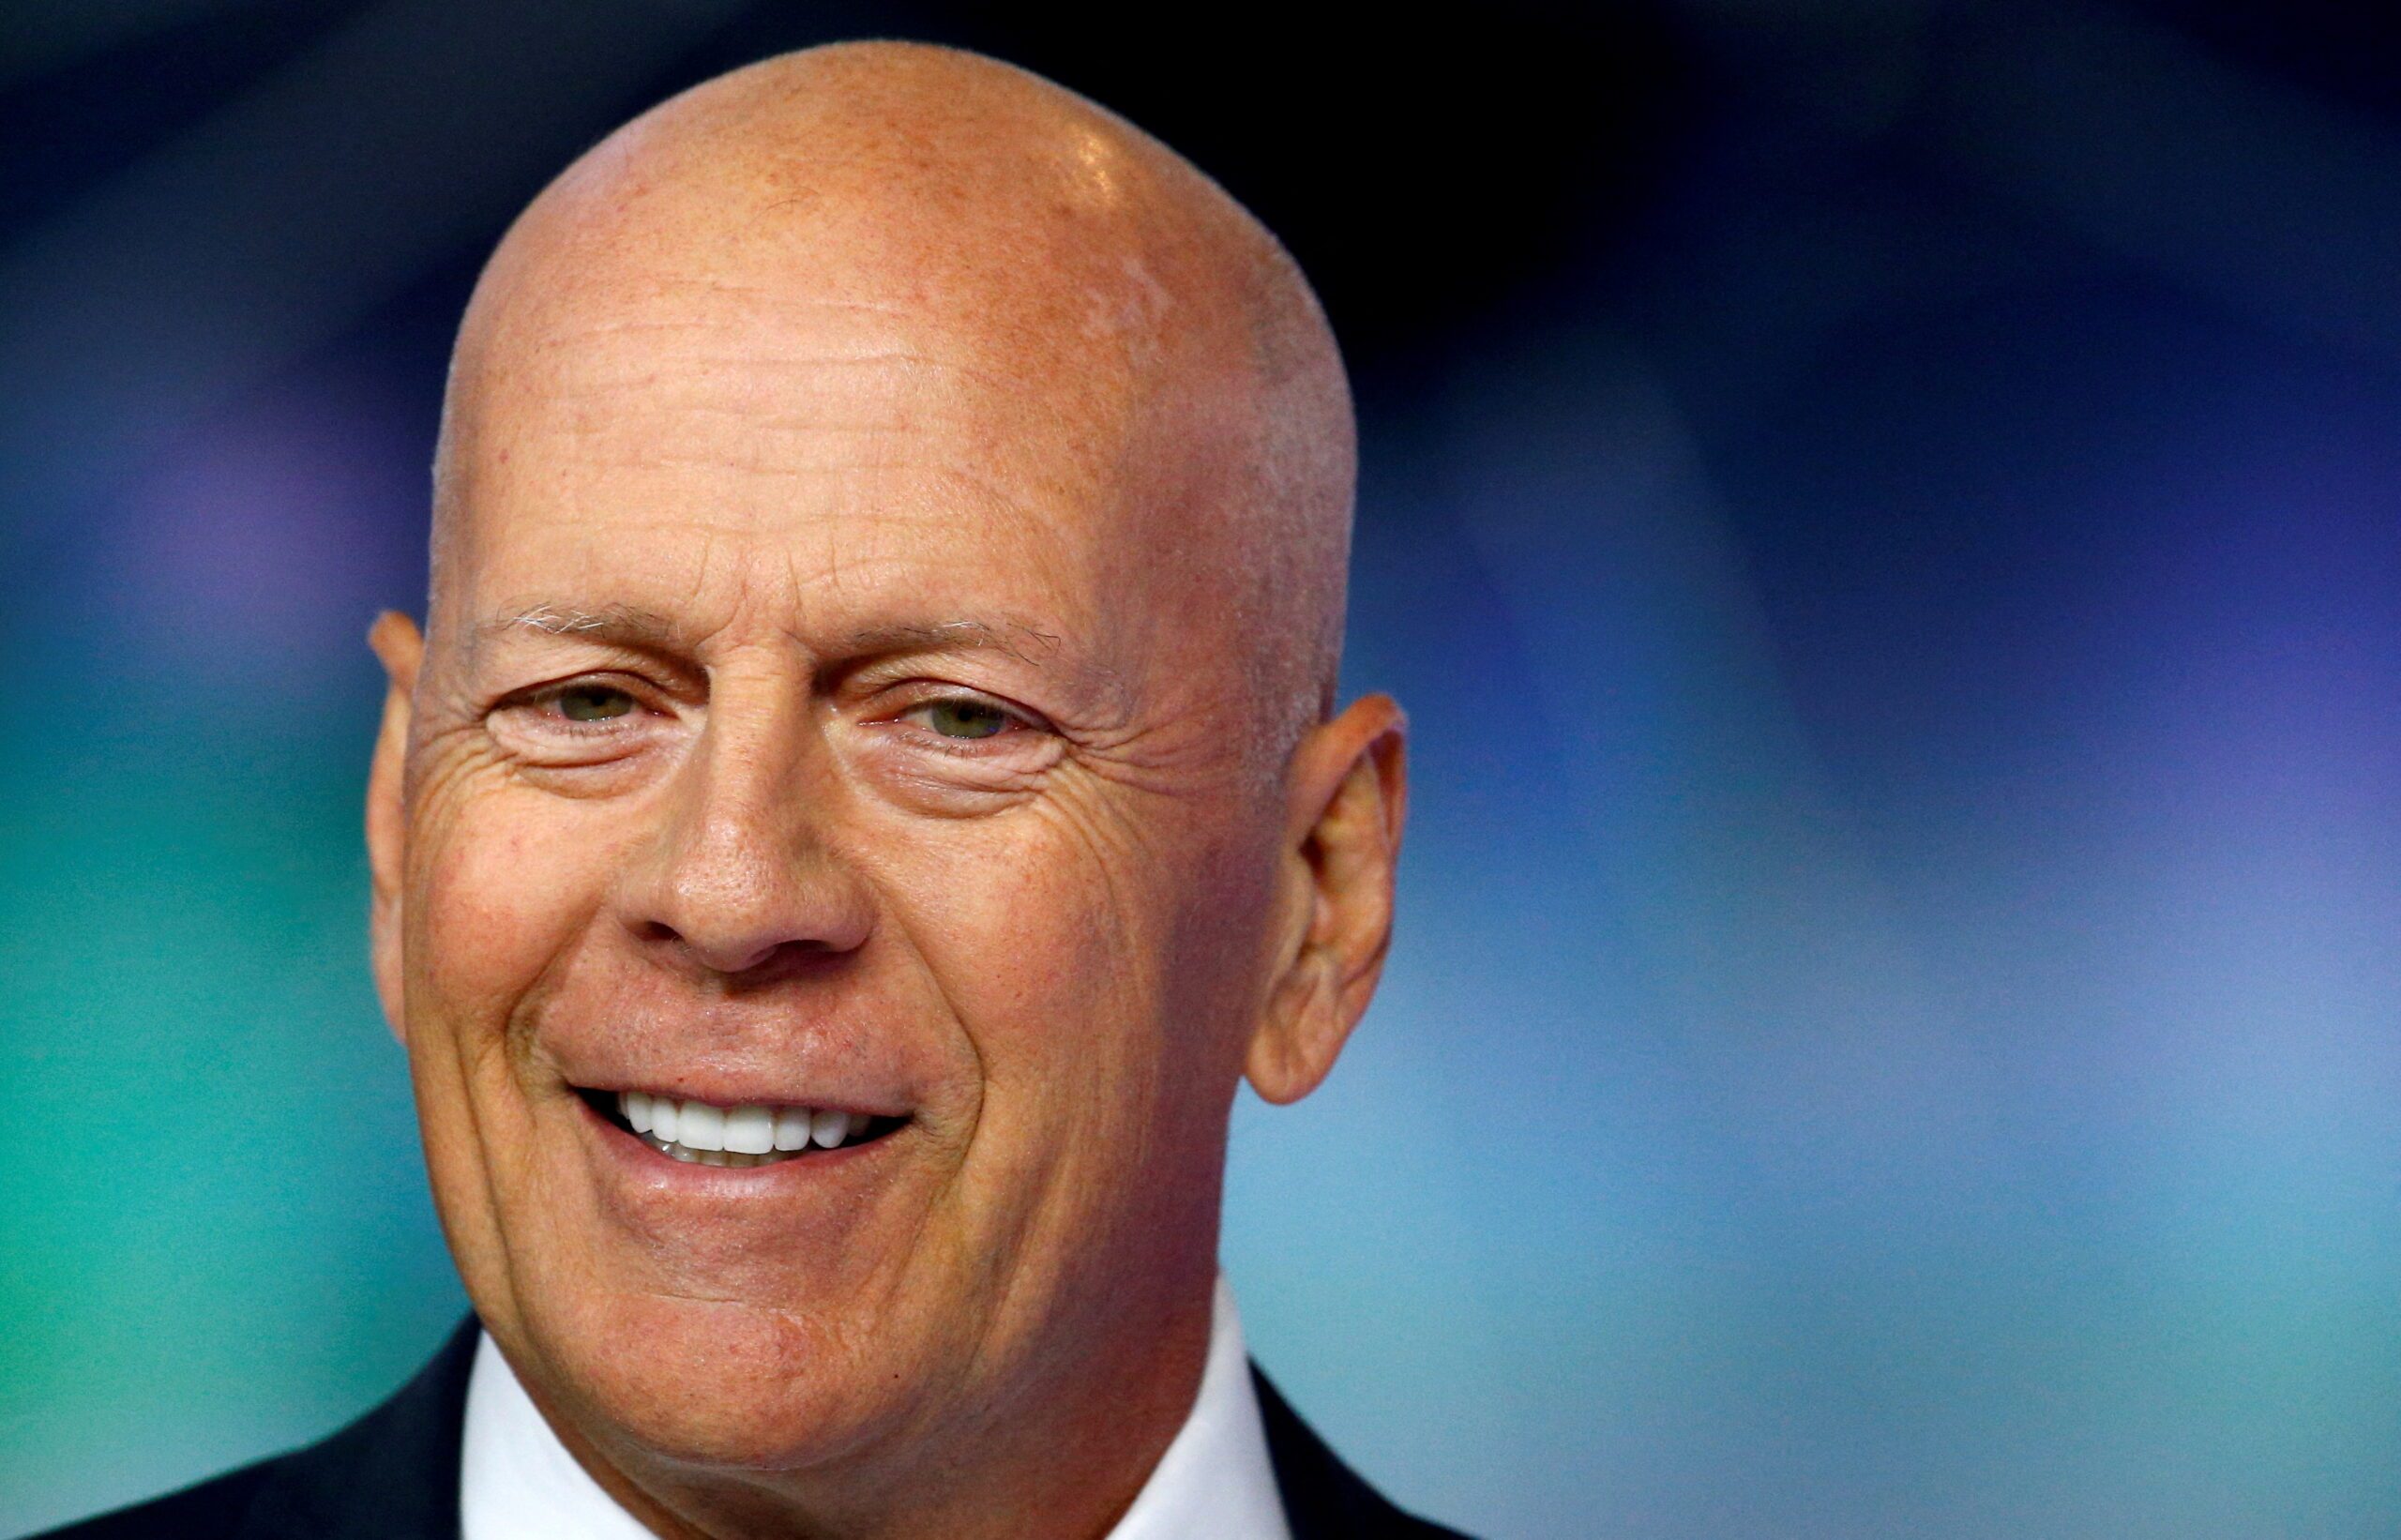 Actor Bruce Willis’ ‘condition has progressed’ to dementia, says family